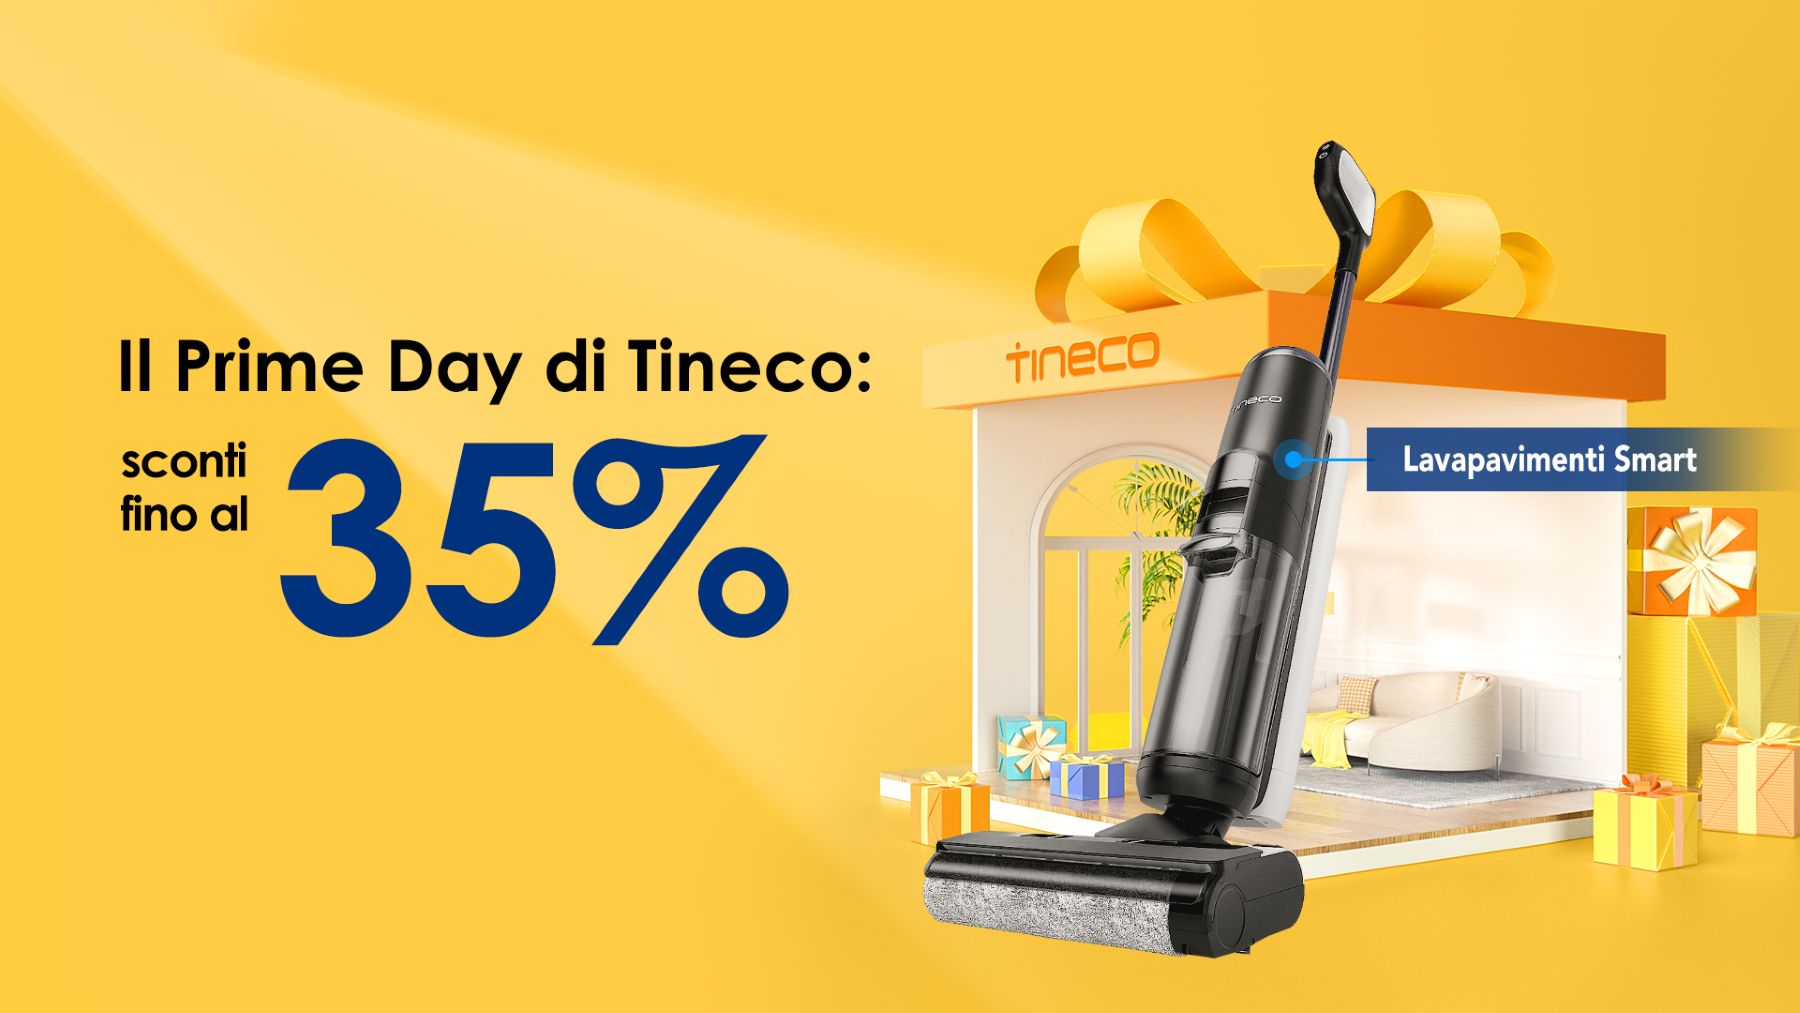 Revolutionize Your Cleaning Routine on Tineco’s Prime Day: Five Unbeatable Deals You Can’t Ignore